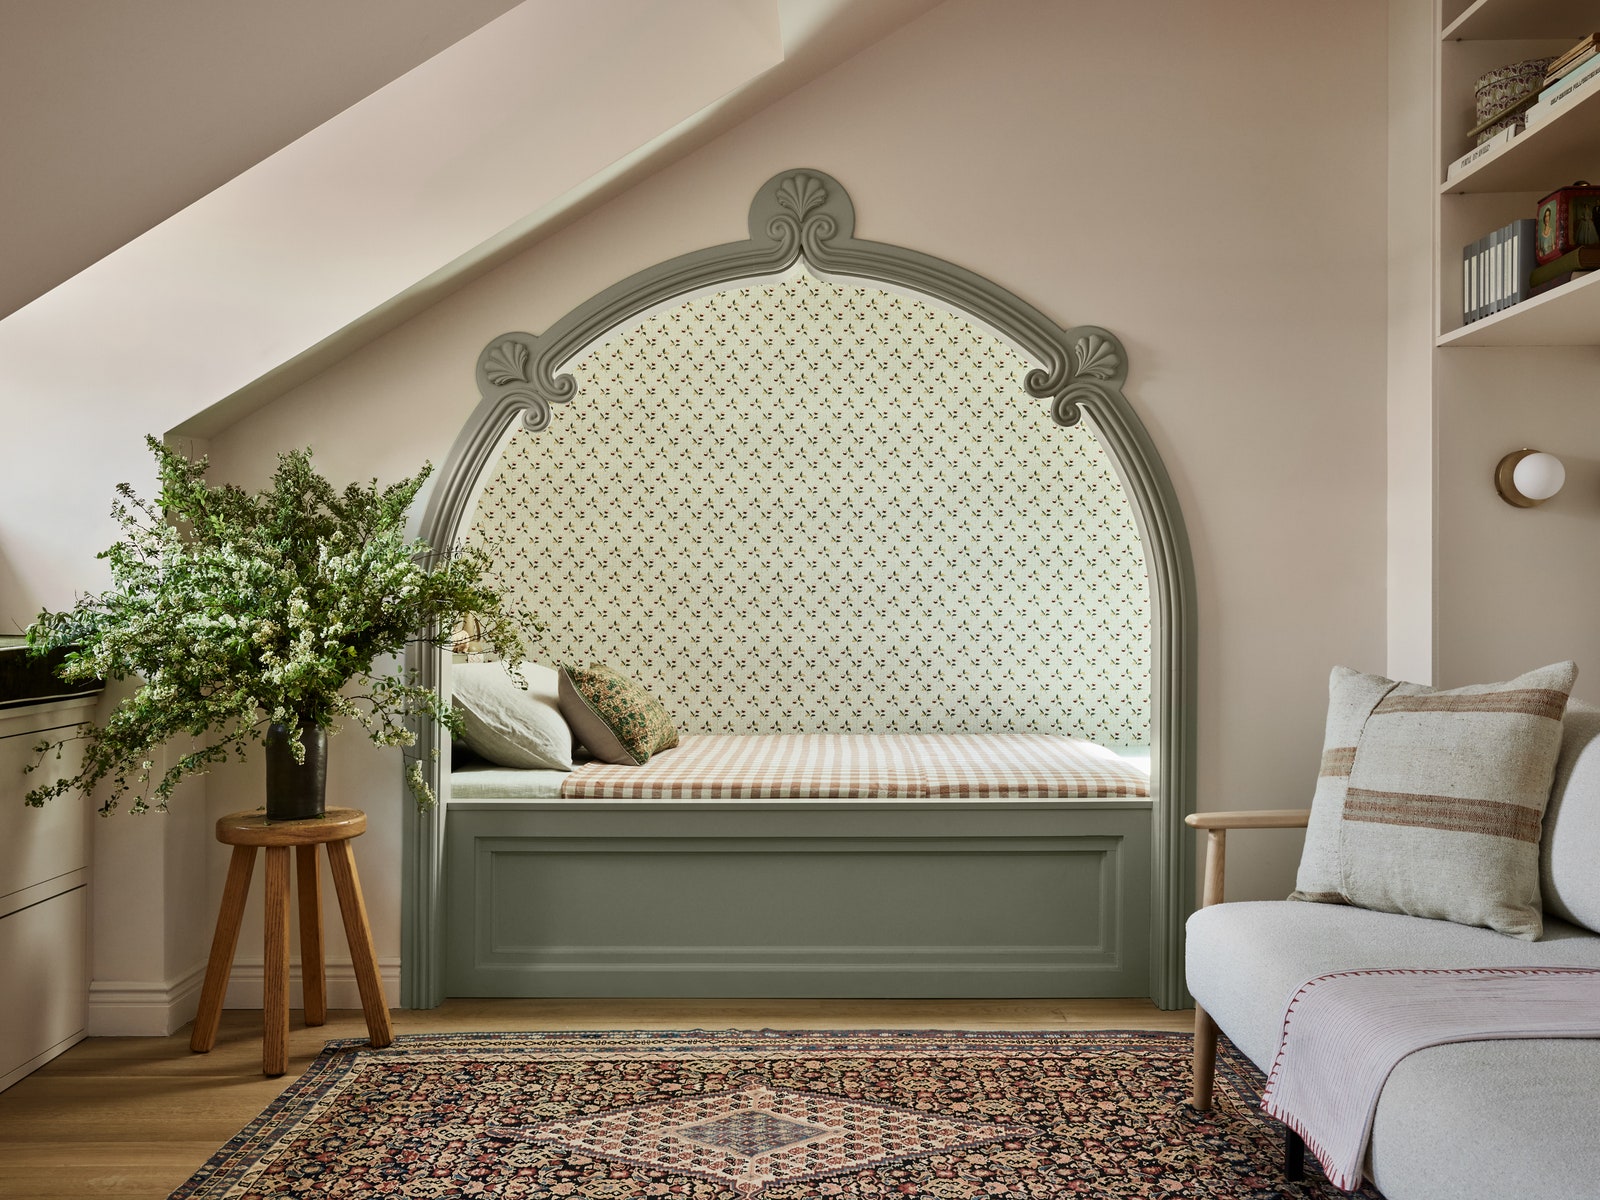 Tour a Brooklyn Home With the Most Charming Built-In Bed Nook